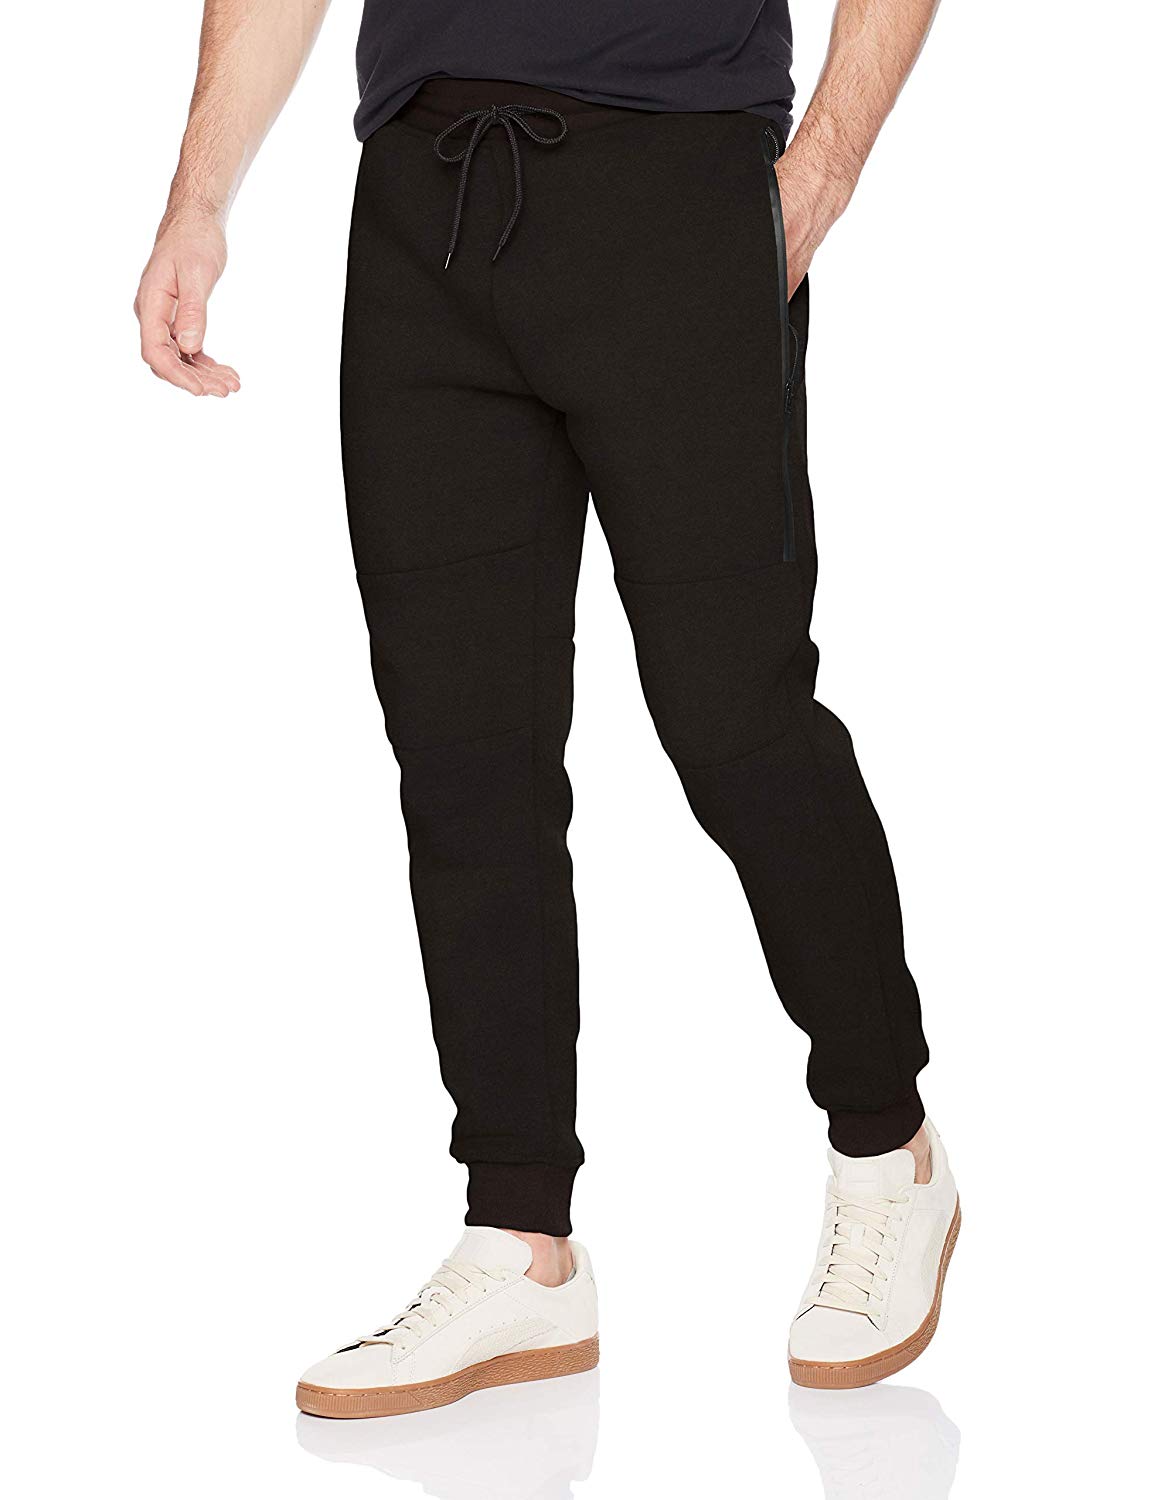 Southpole Men's Fleece Jogger Pants with Water Proof Long, Black, Size ...